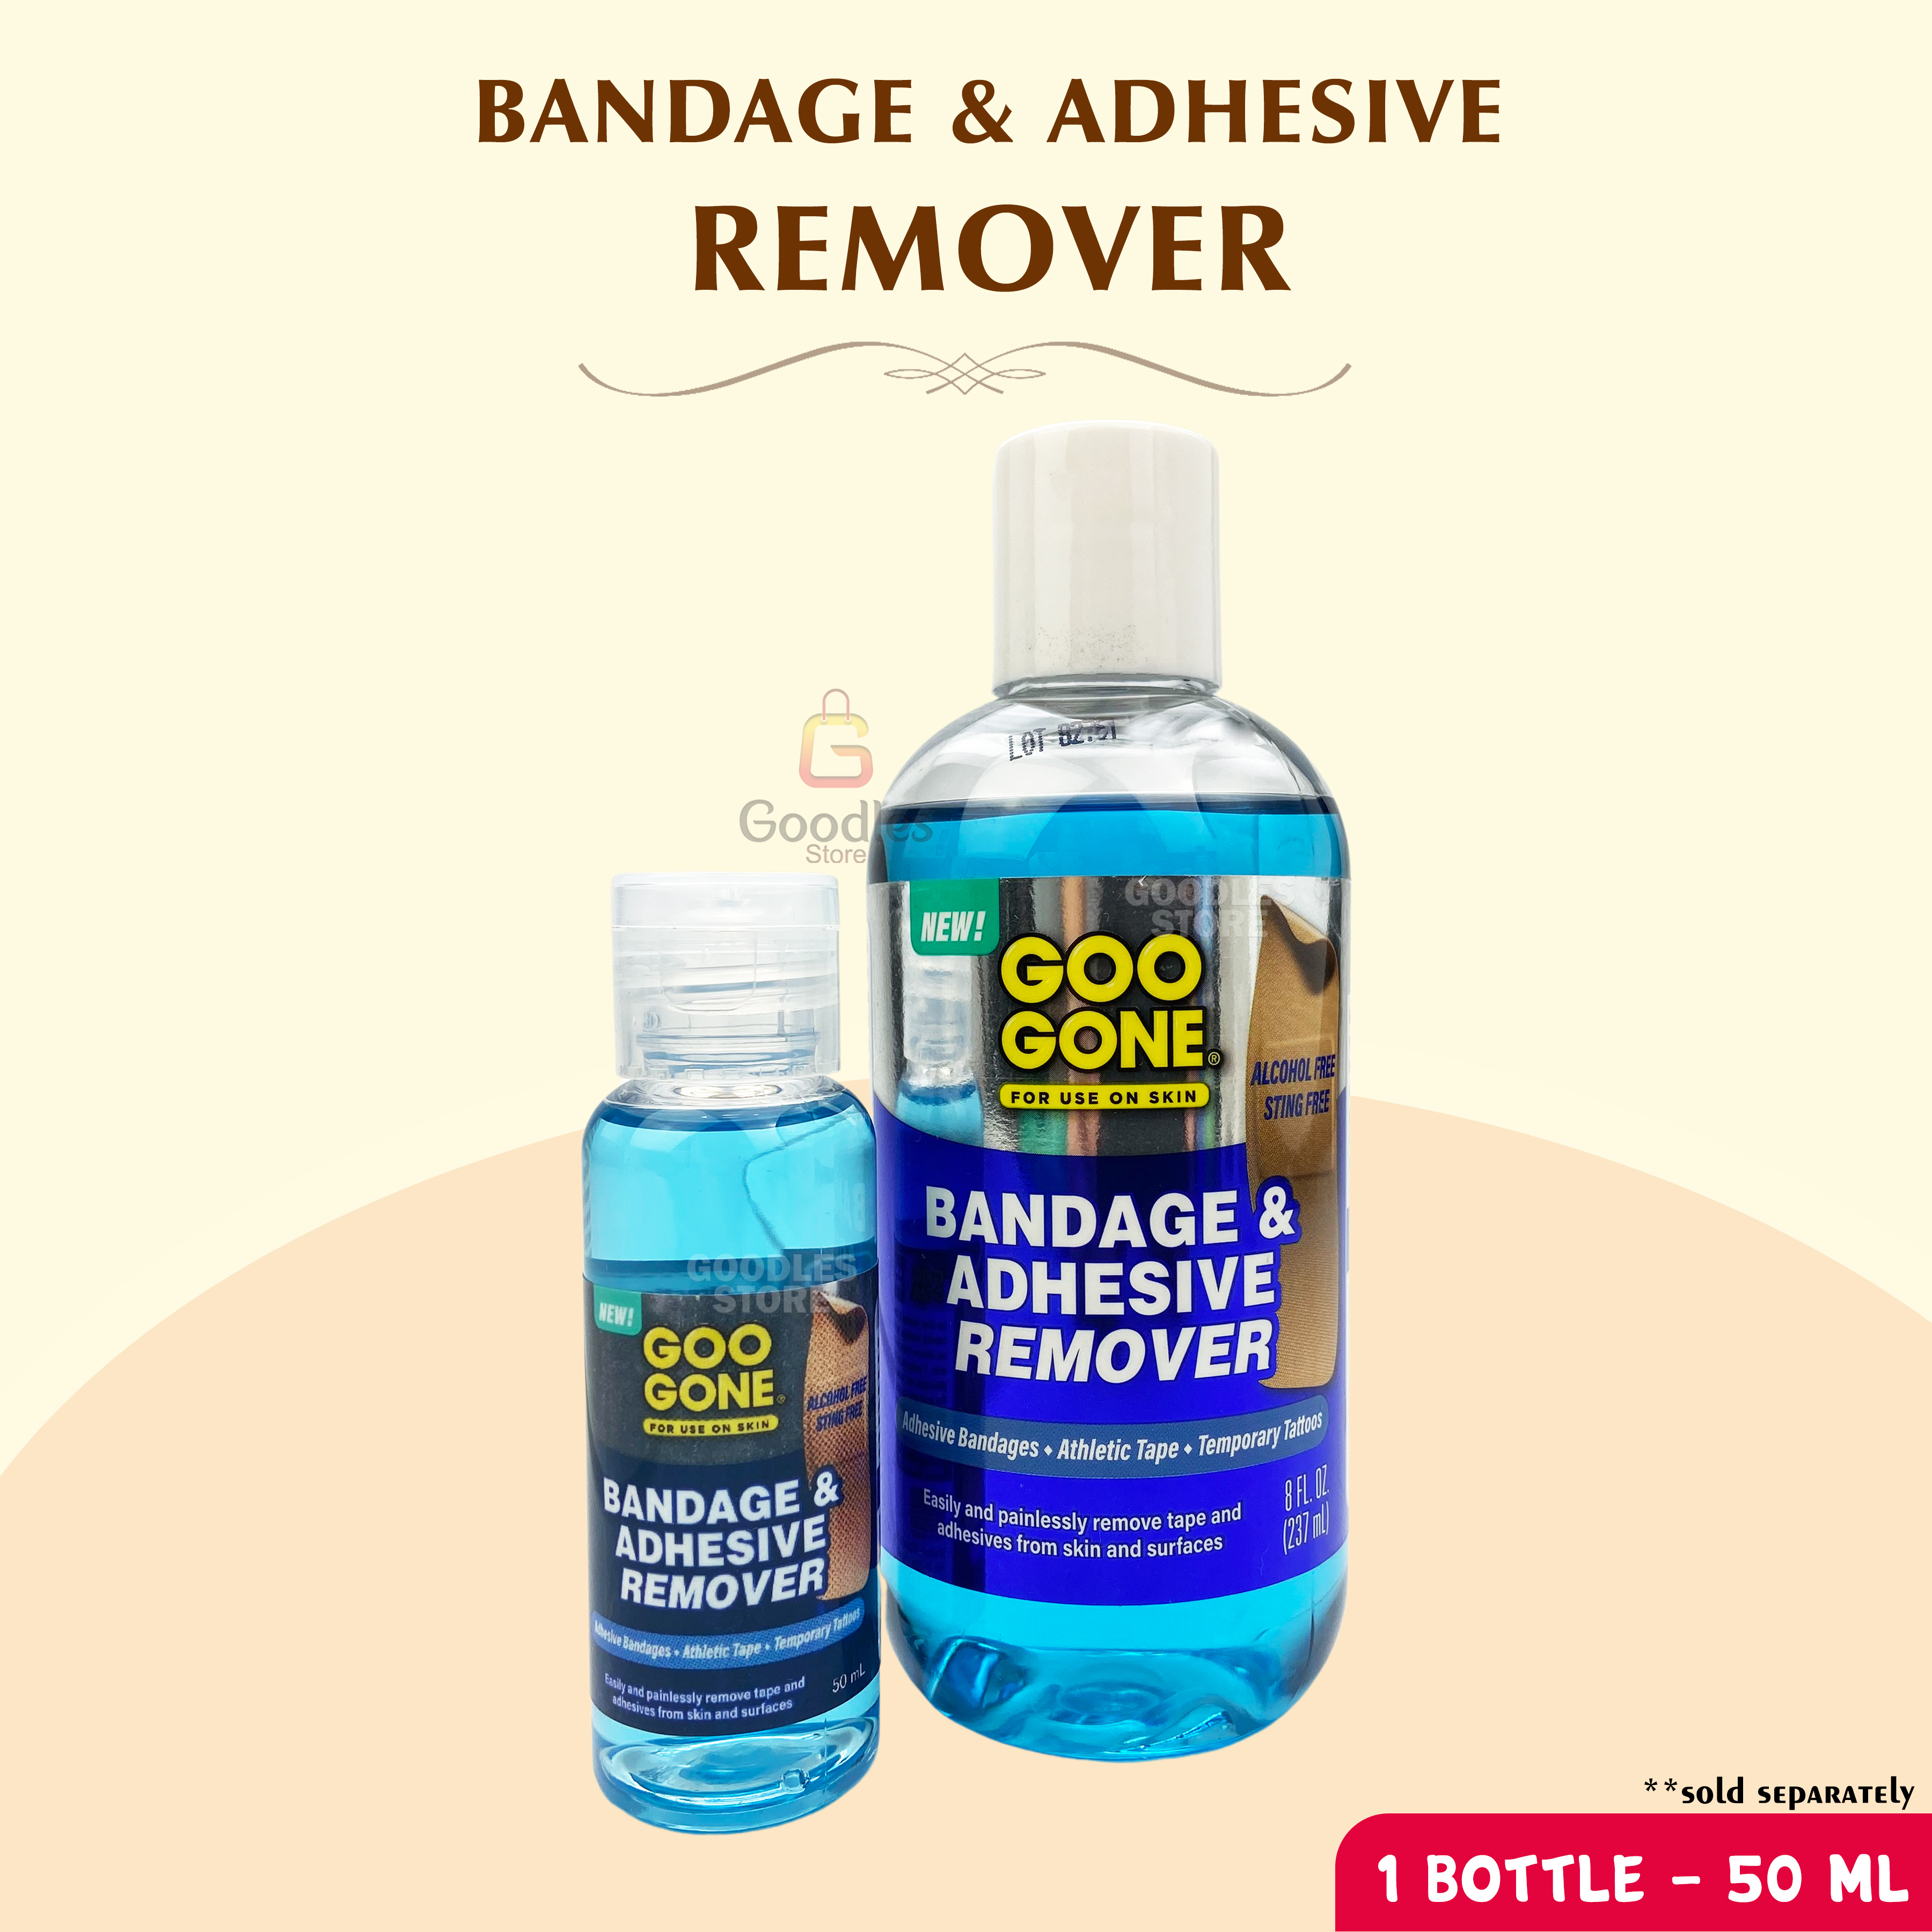 Goo Gone Bandage Adhesive Remover For Skin - 8 Ounce - Safe Method to Remove